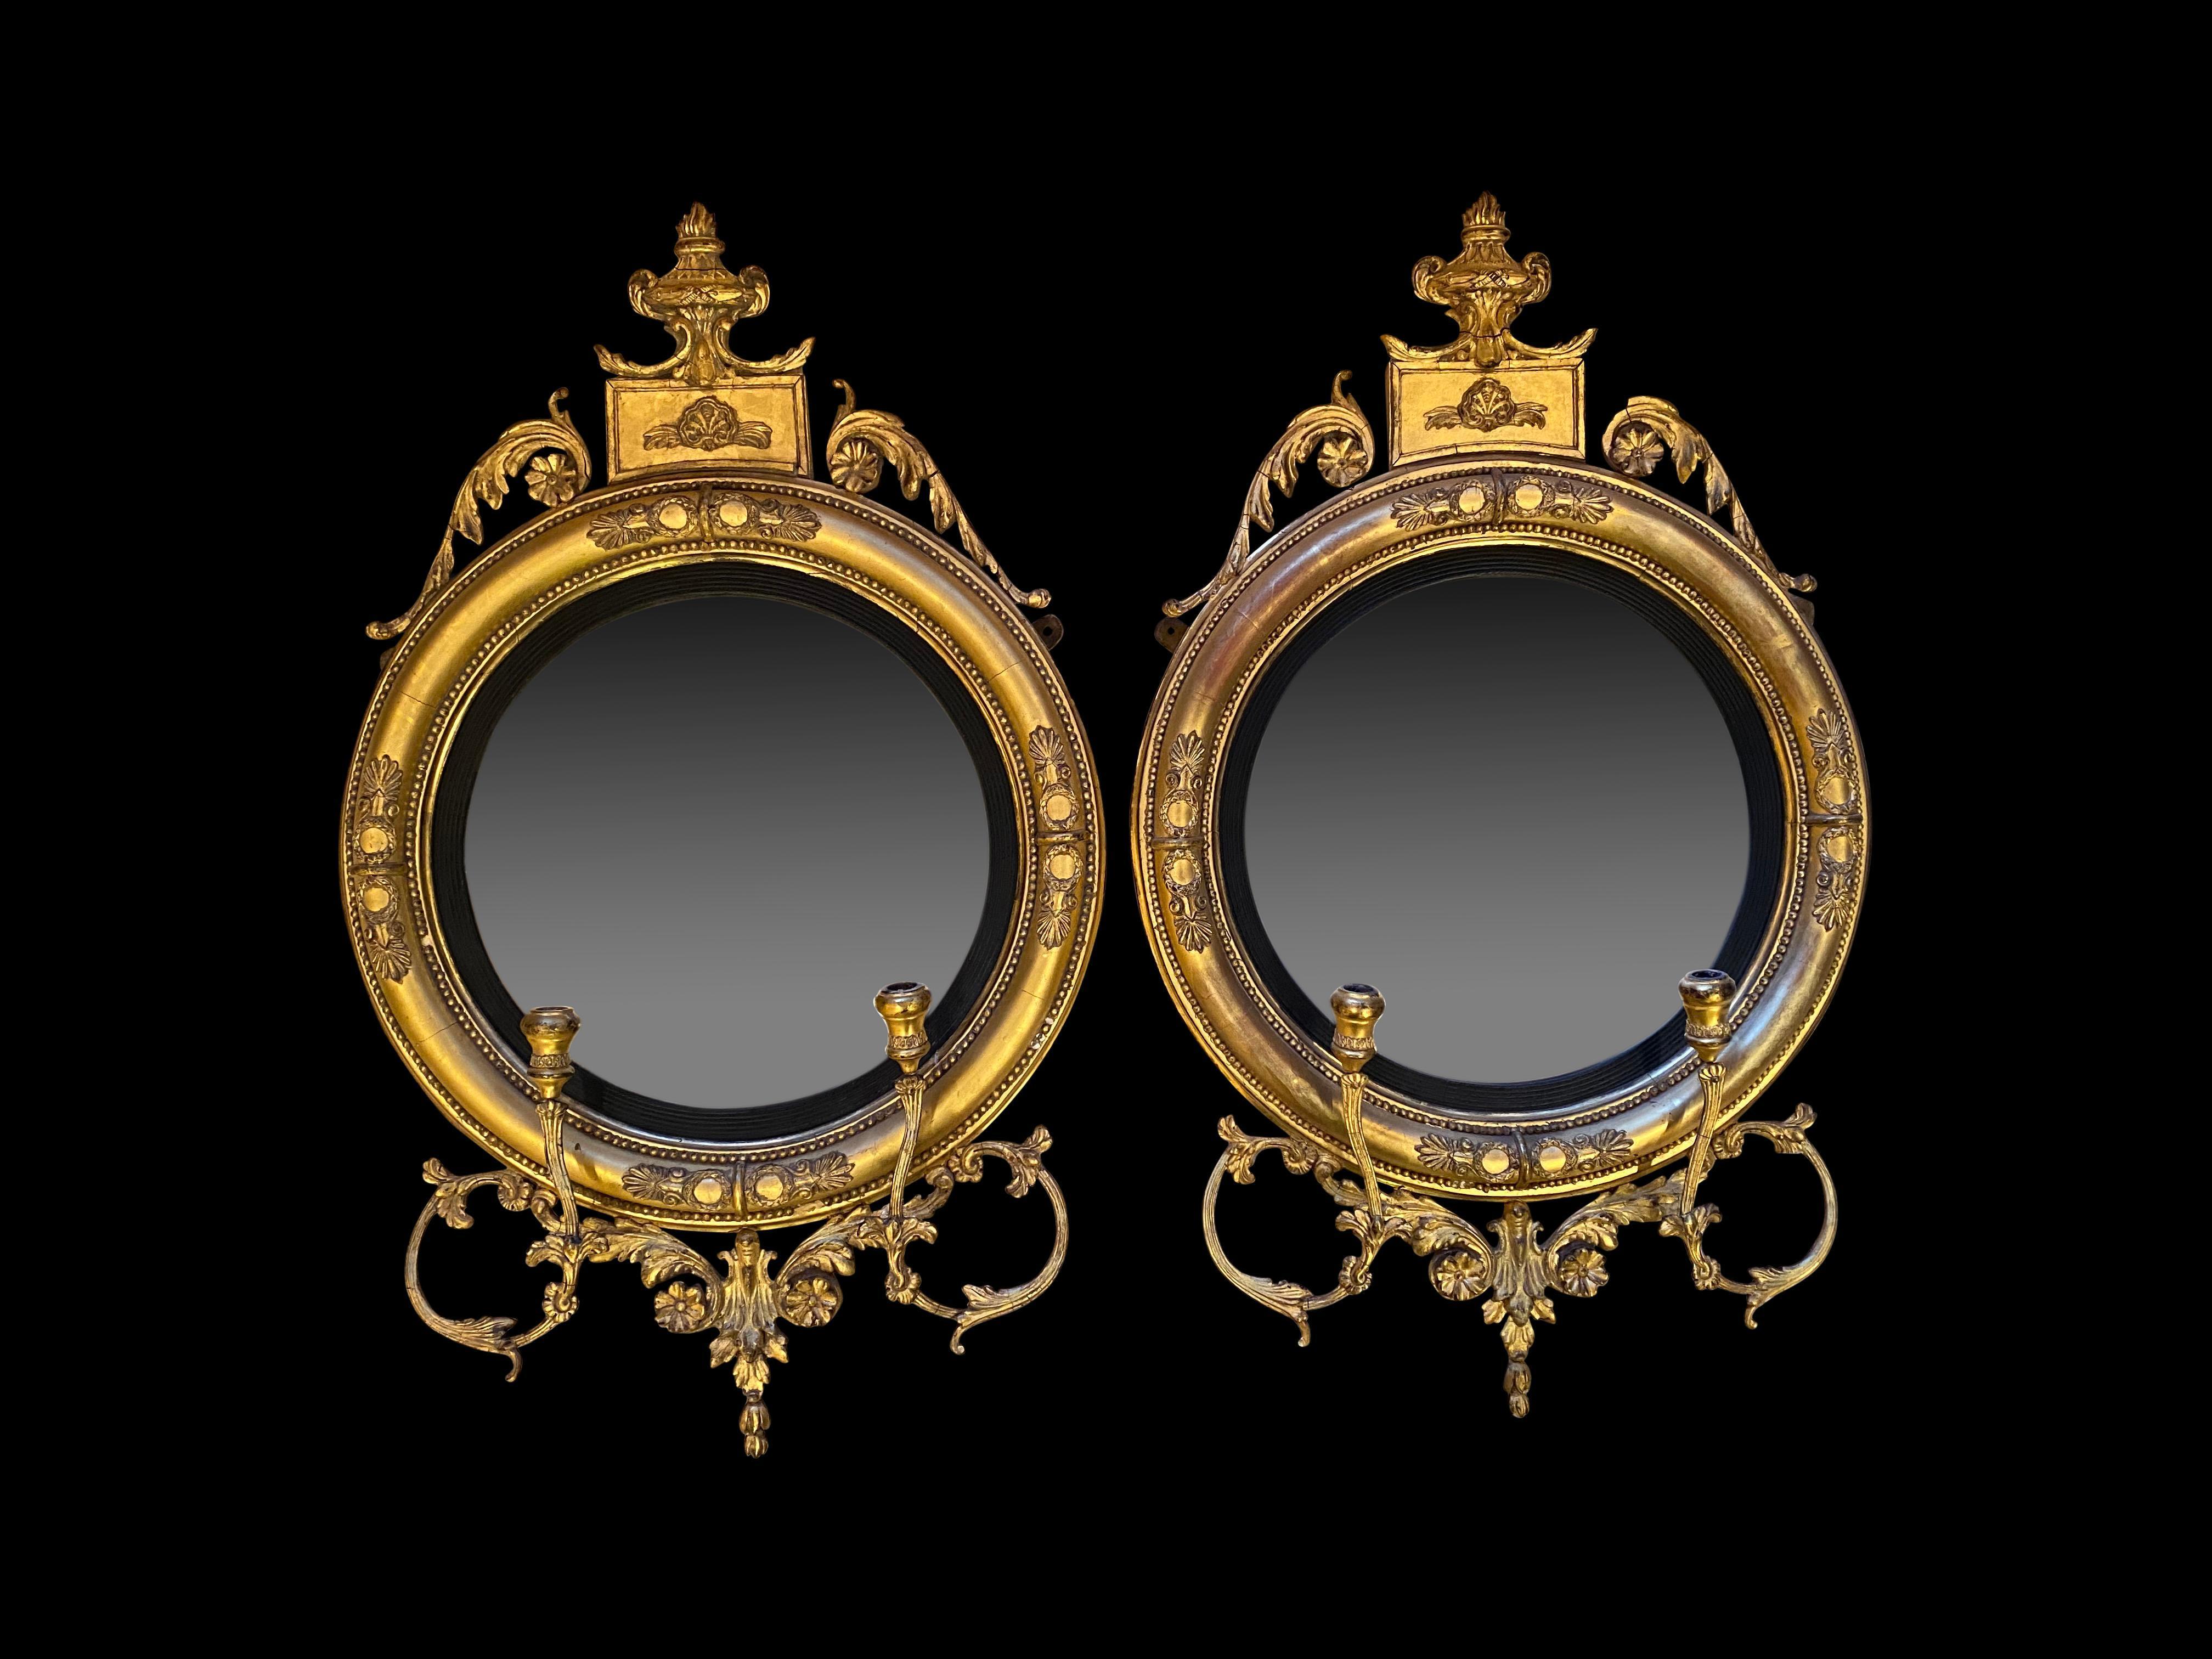 A fine pair of Regency carved giltwood and gesso convex mirrors, English, circa 1820. On top is a wonderful pediment urn. Each circular mirror plate with an ebonised and receded border, enclosed with a pair of gilded candle branches and foliate